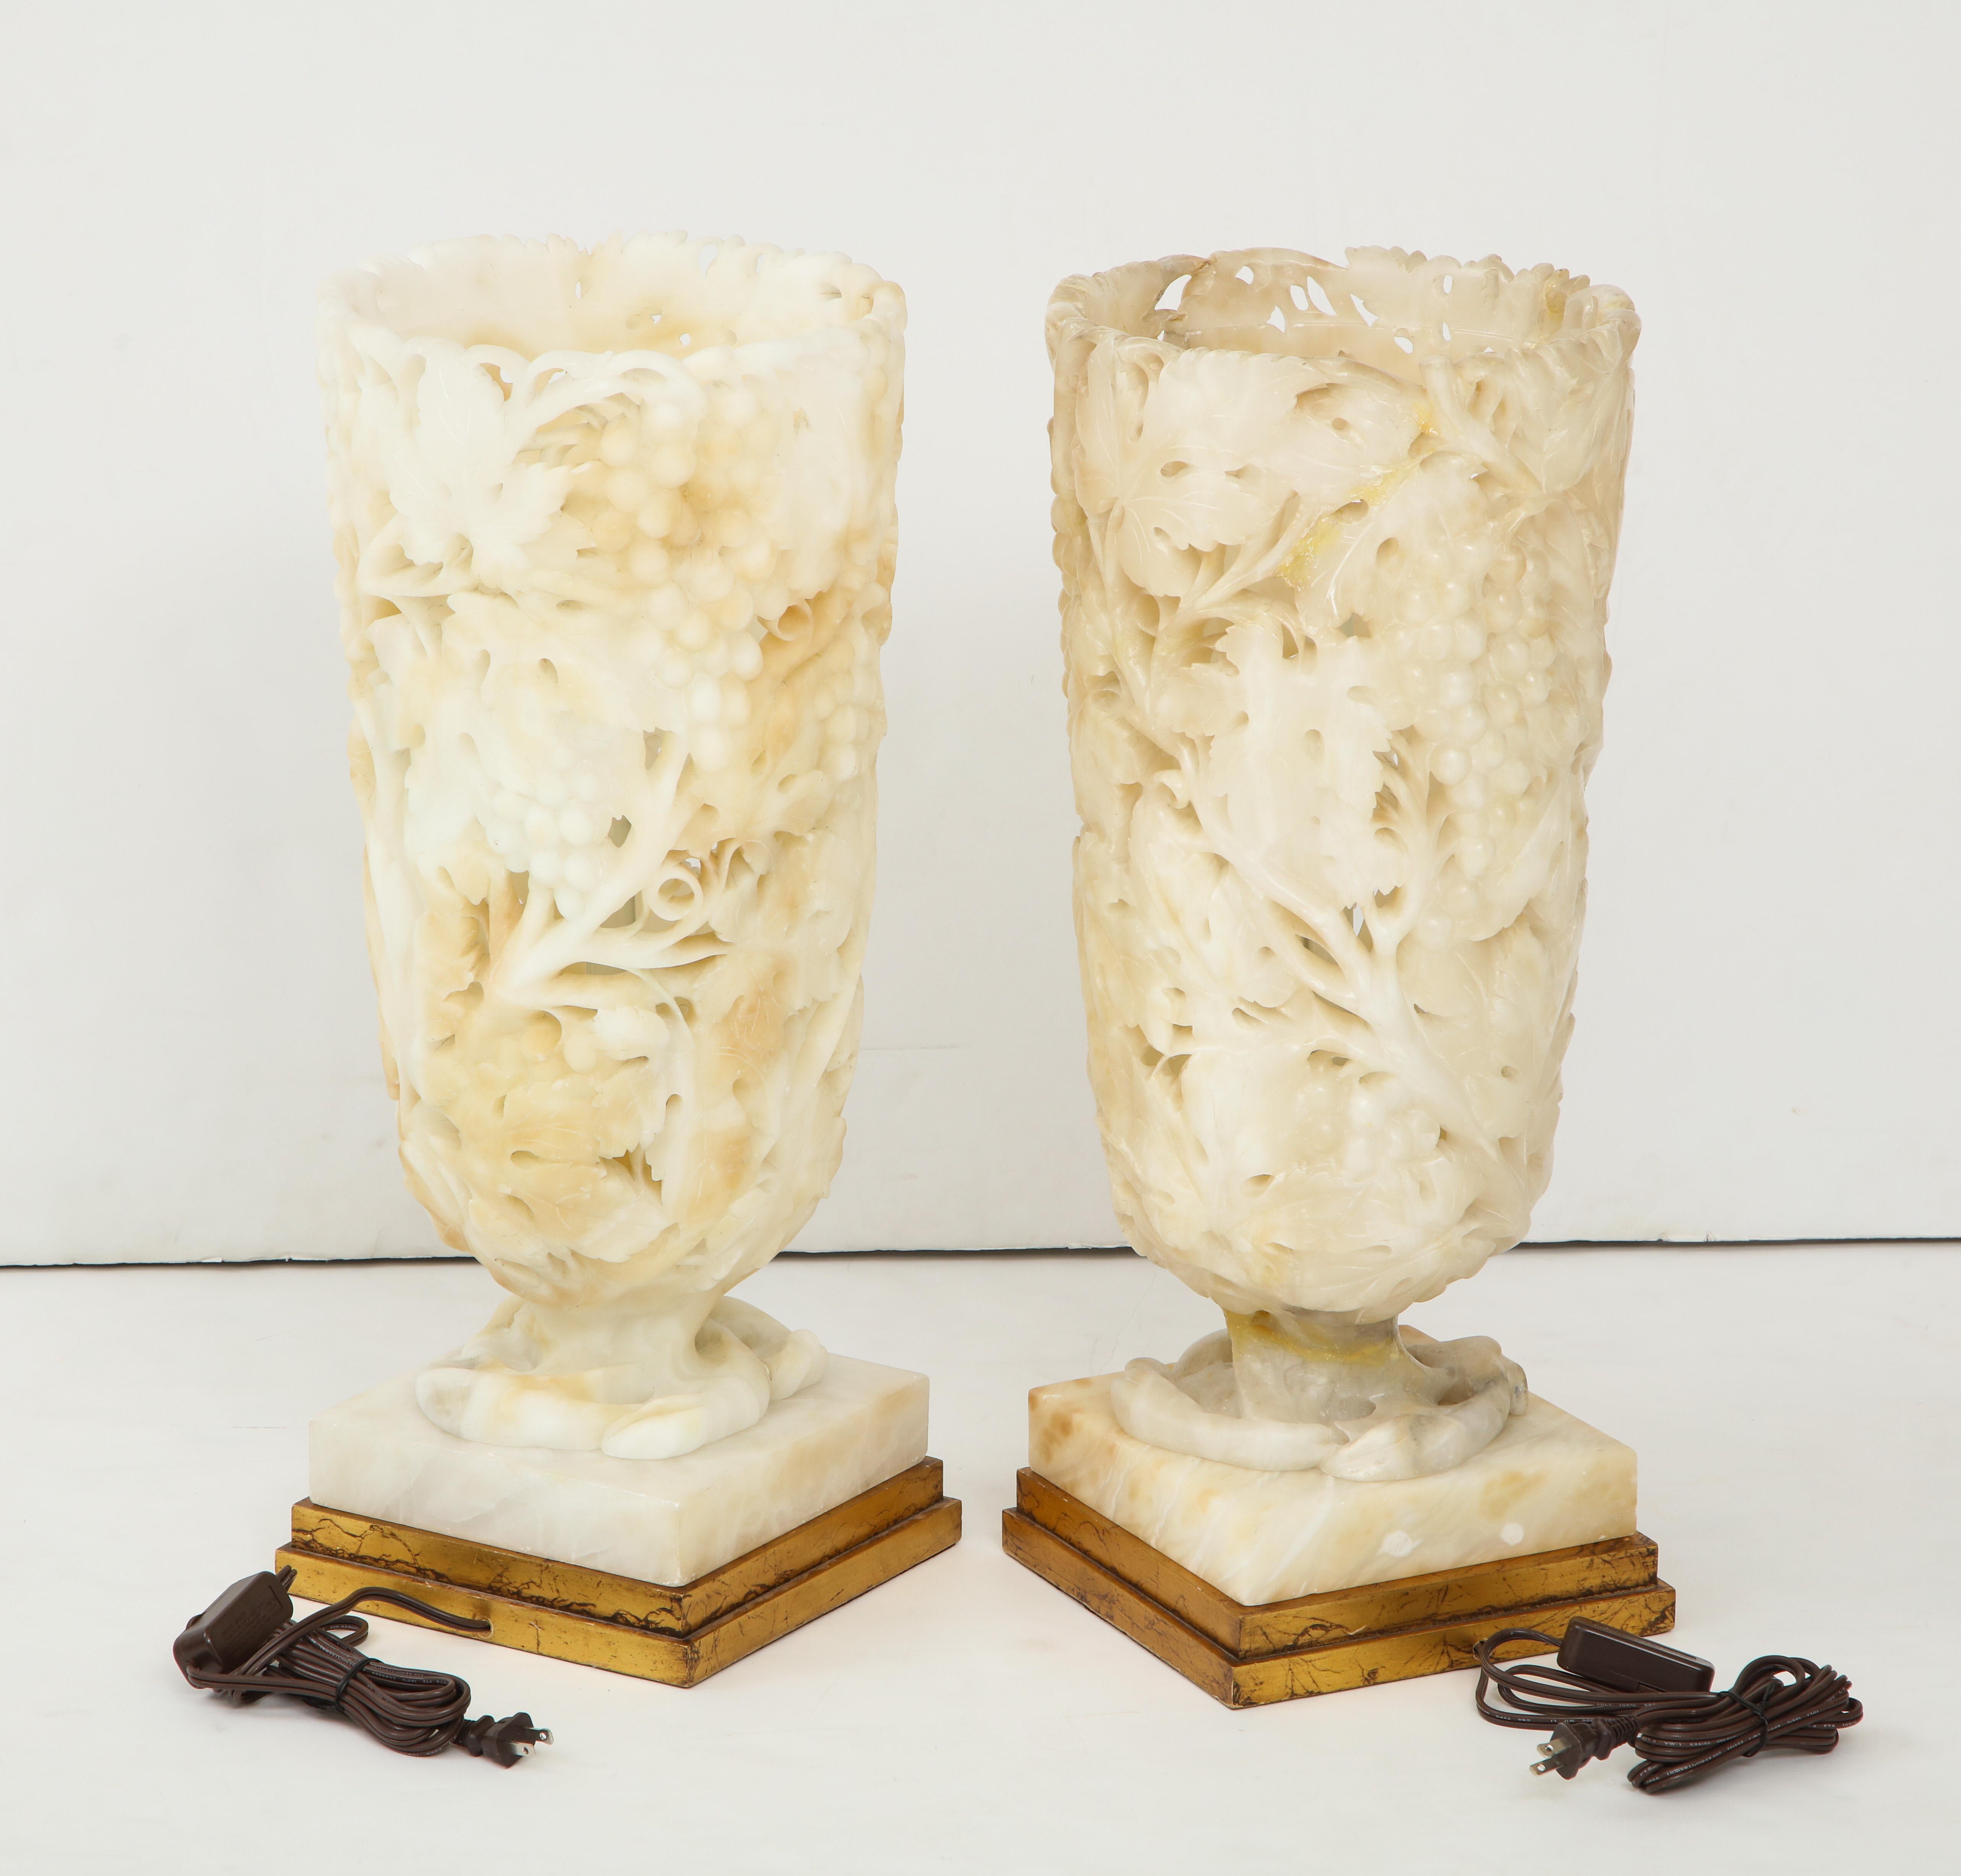 Exquisite Pair of Large Carved Alabaster Lamps 4